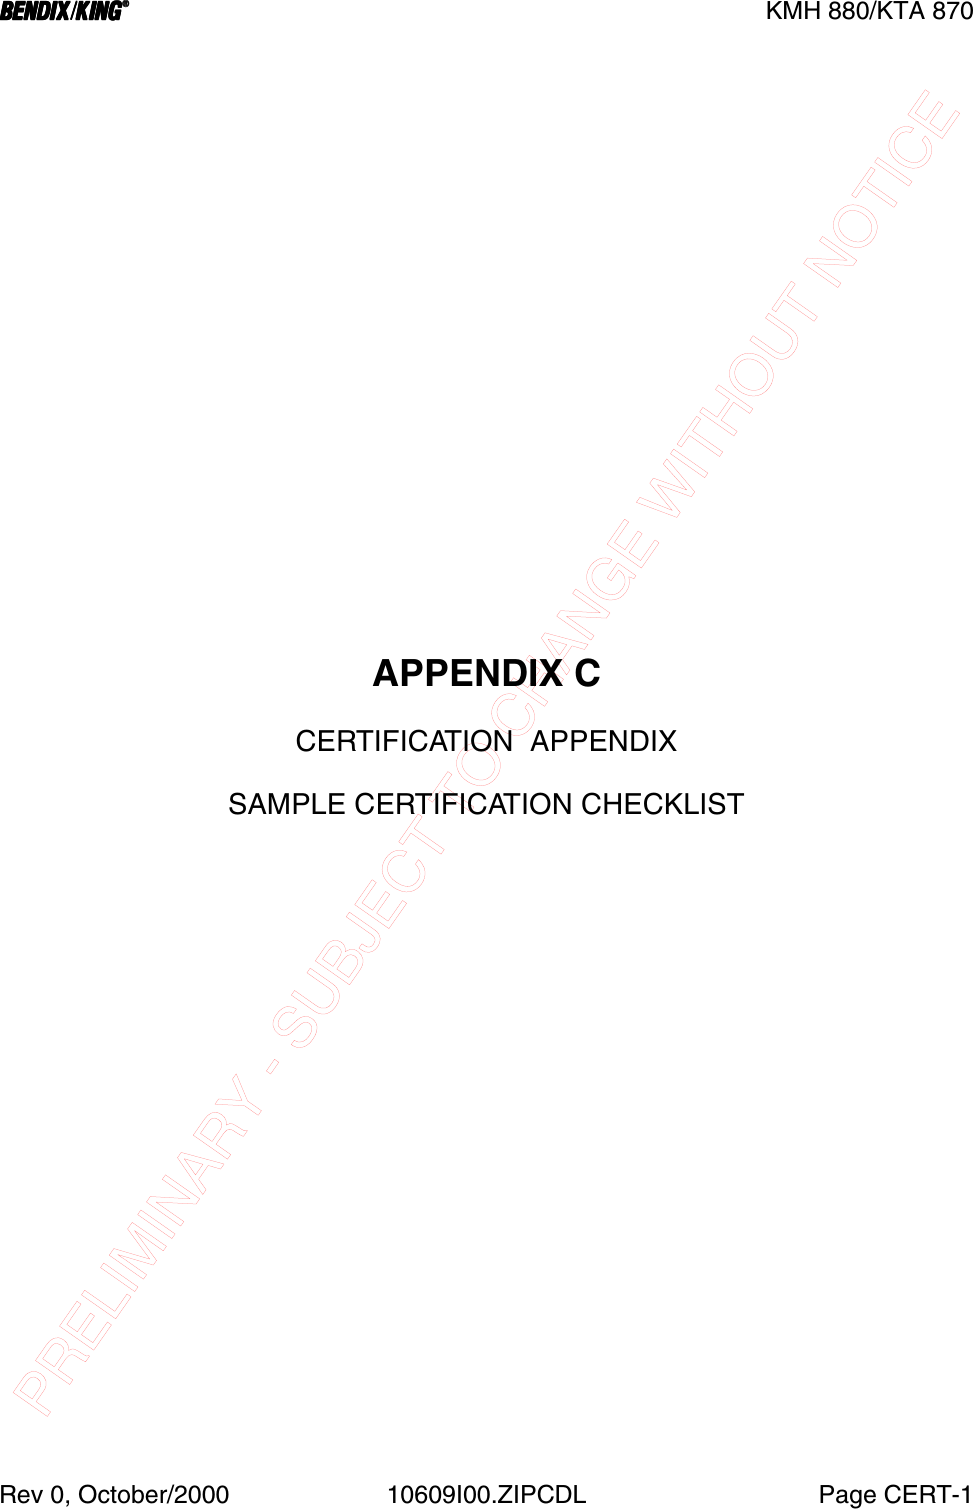 PRELIMINARY - SUBJECT TO CHANGE WITHOUT NOTICEBBBBKMH 880/KTA 870Rev 0, October/2000 10609I00.ZIPCDL Page CERT-1APPENDIX CCERTIFICATION  APPENDIXSAMPLE CERTIFICATION CHECKLIST